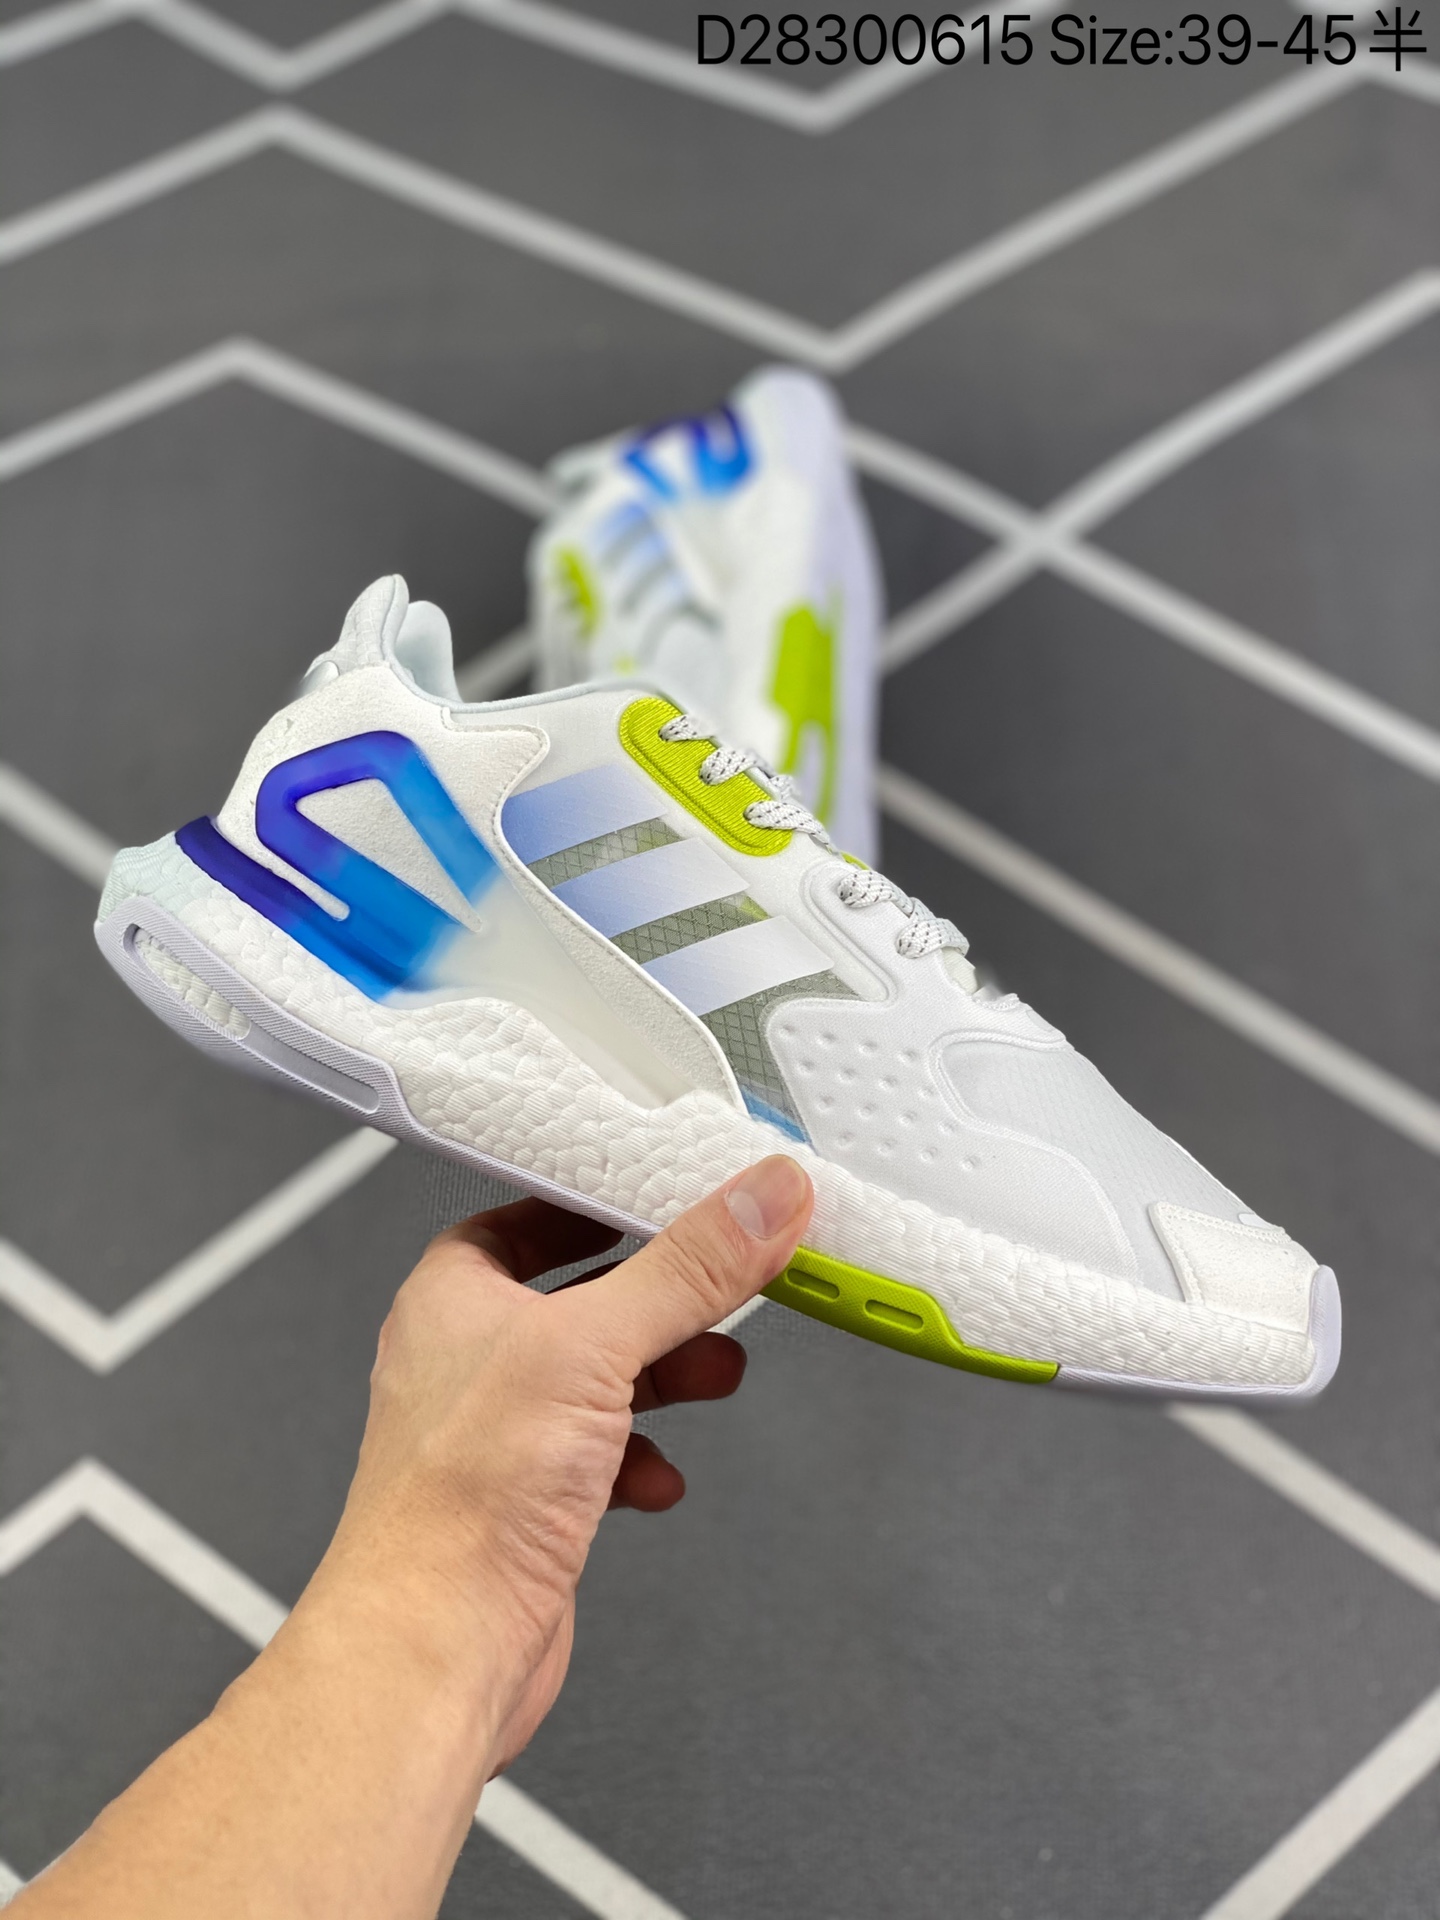 adidas Originals 2020 Day Jogger Boost"White/Green/Yellow"100% Original flagship store Adidas Shoes sale authentic original for men women new arrival casual shoes 2022 fashion rubber breathable on sale design summer train